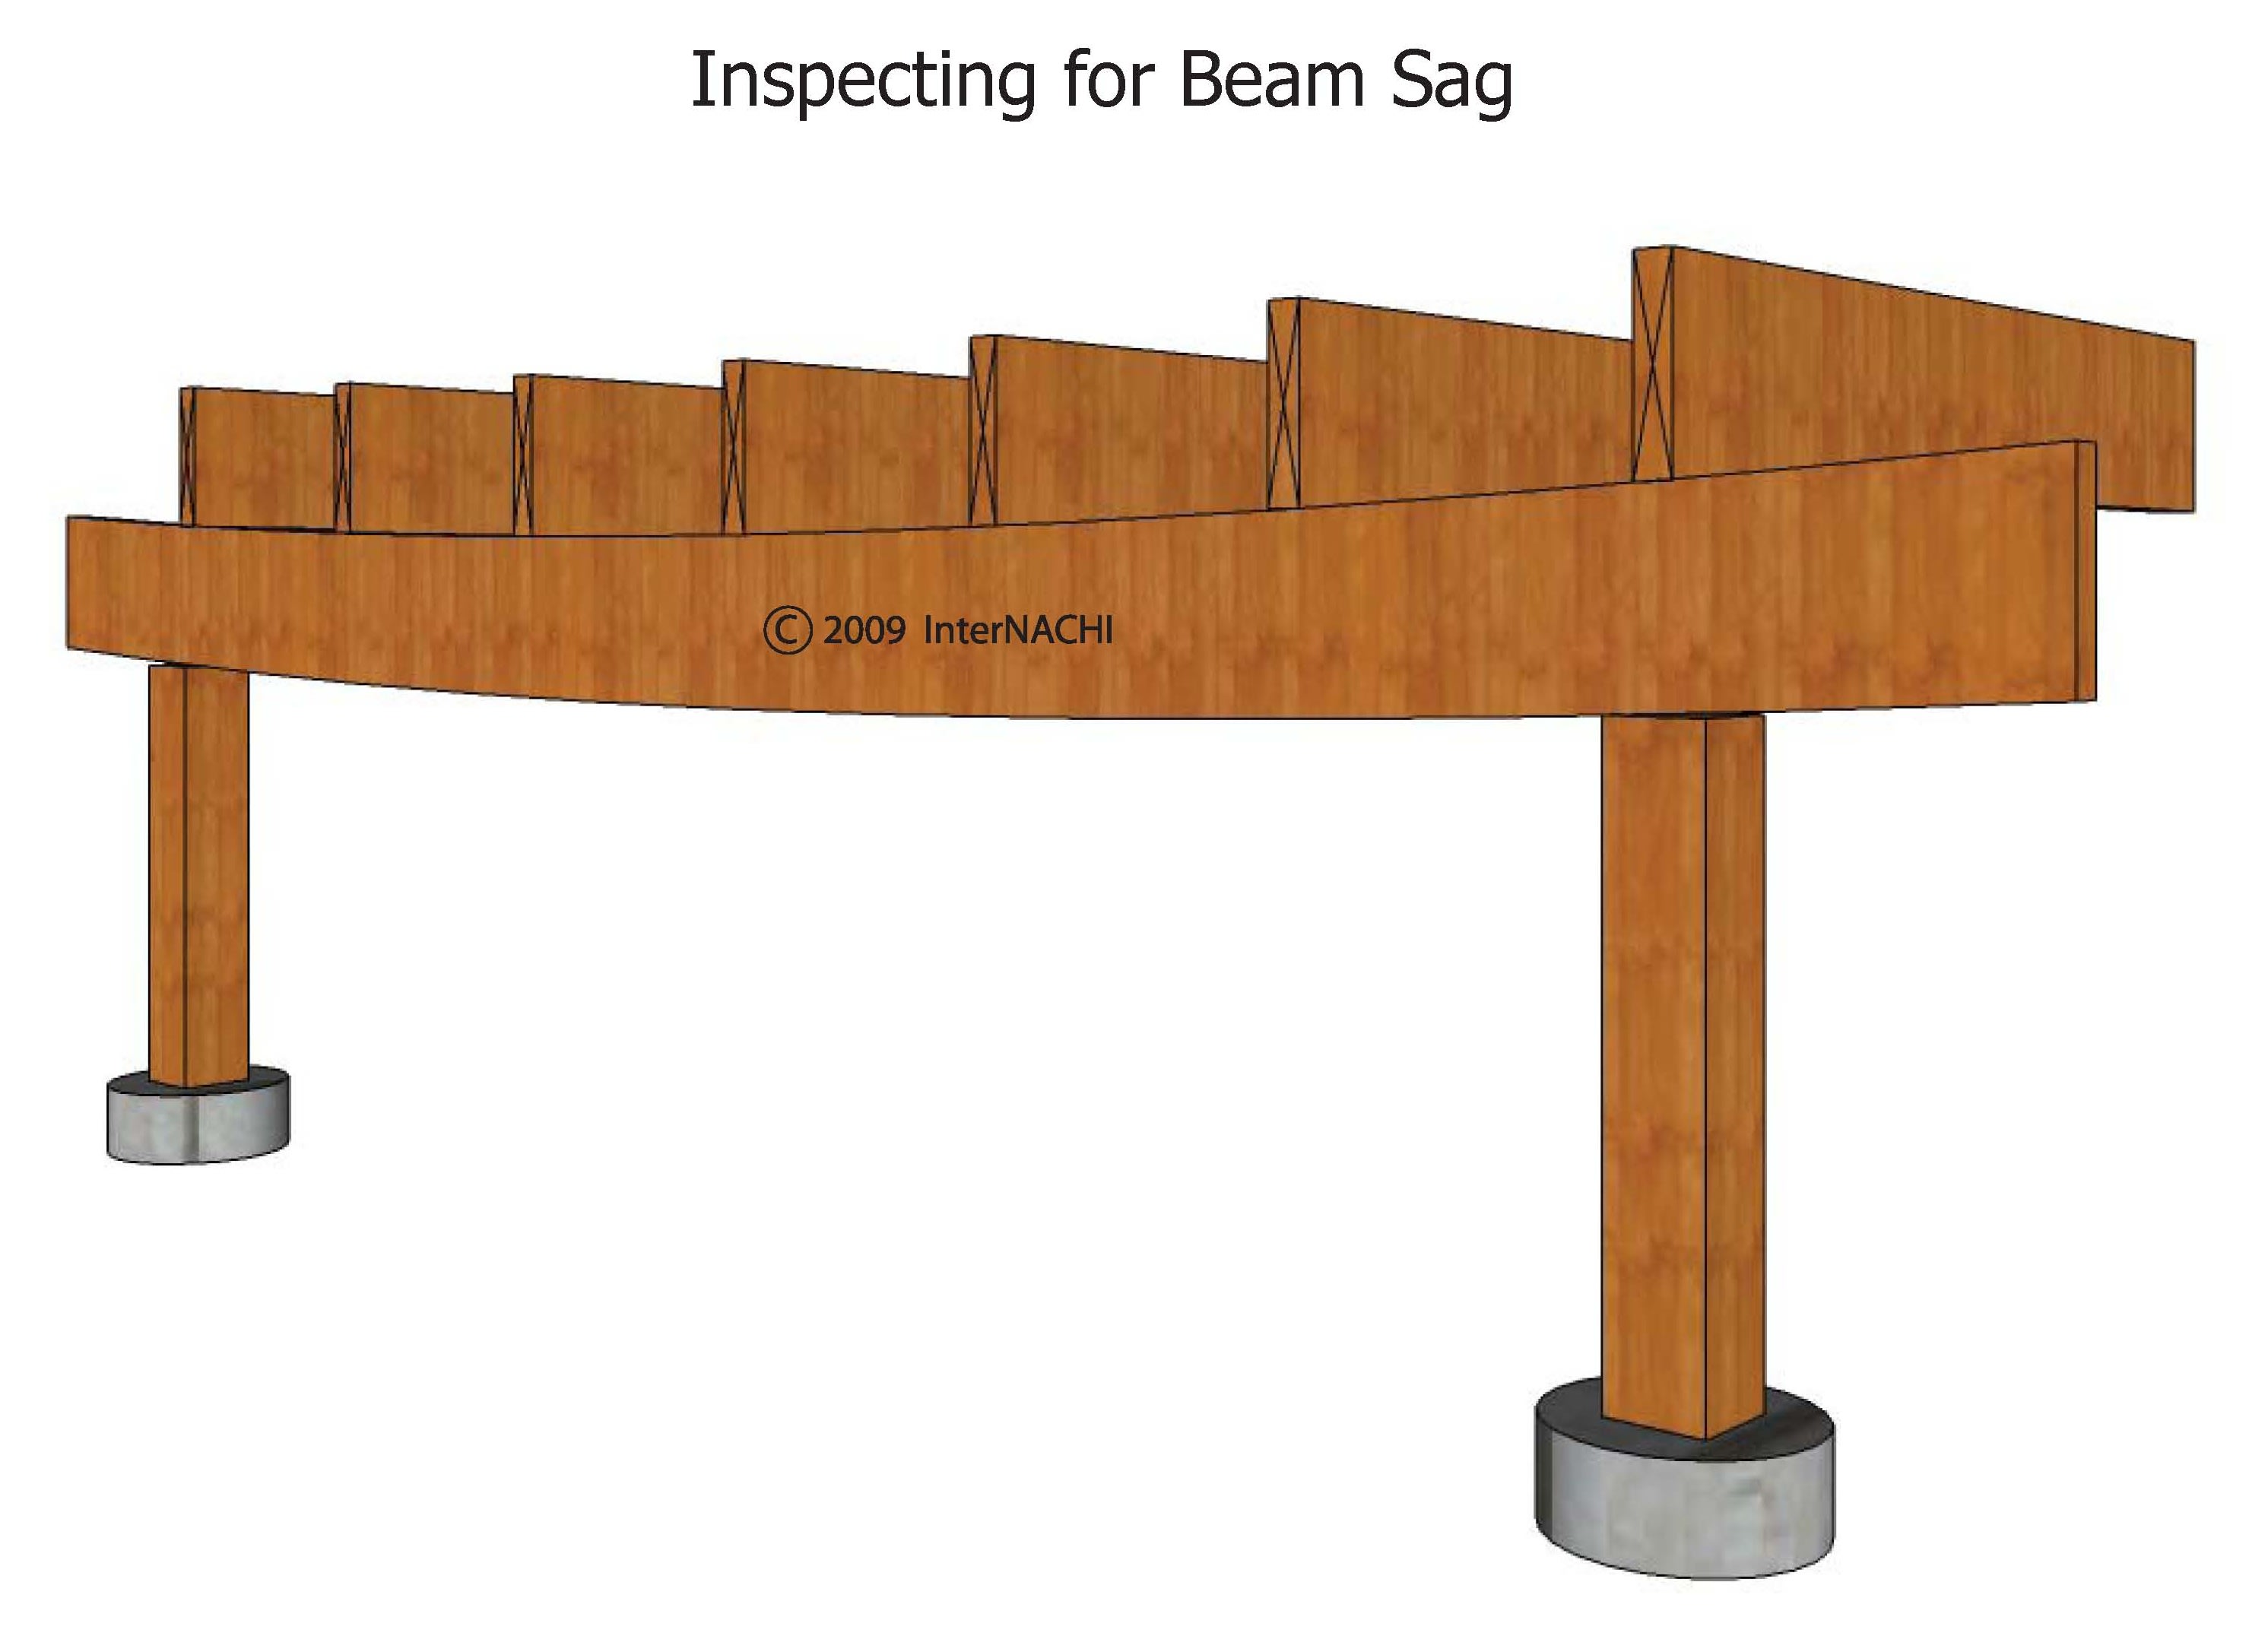 Inspecting for beam sag.